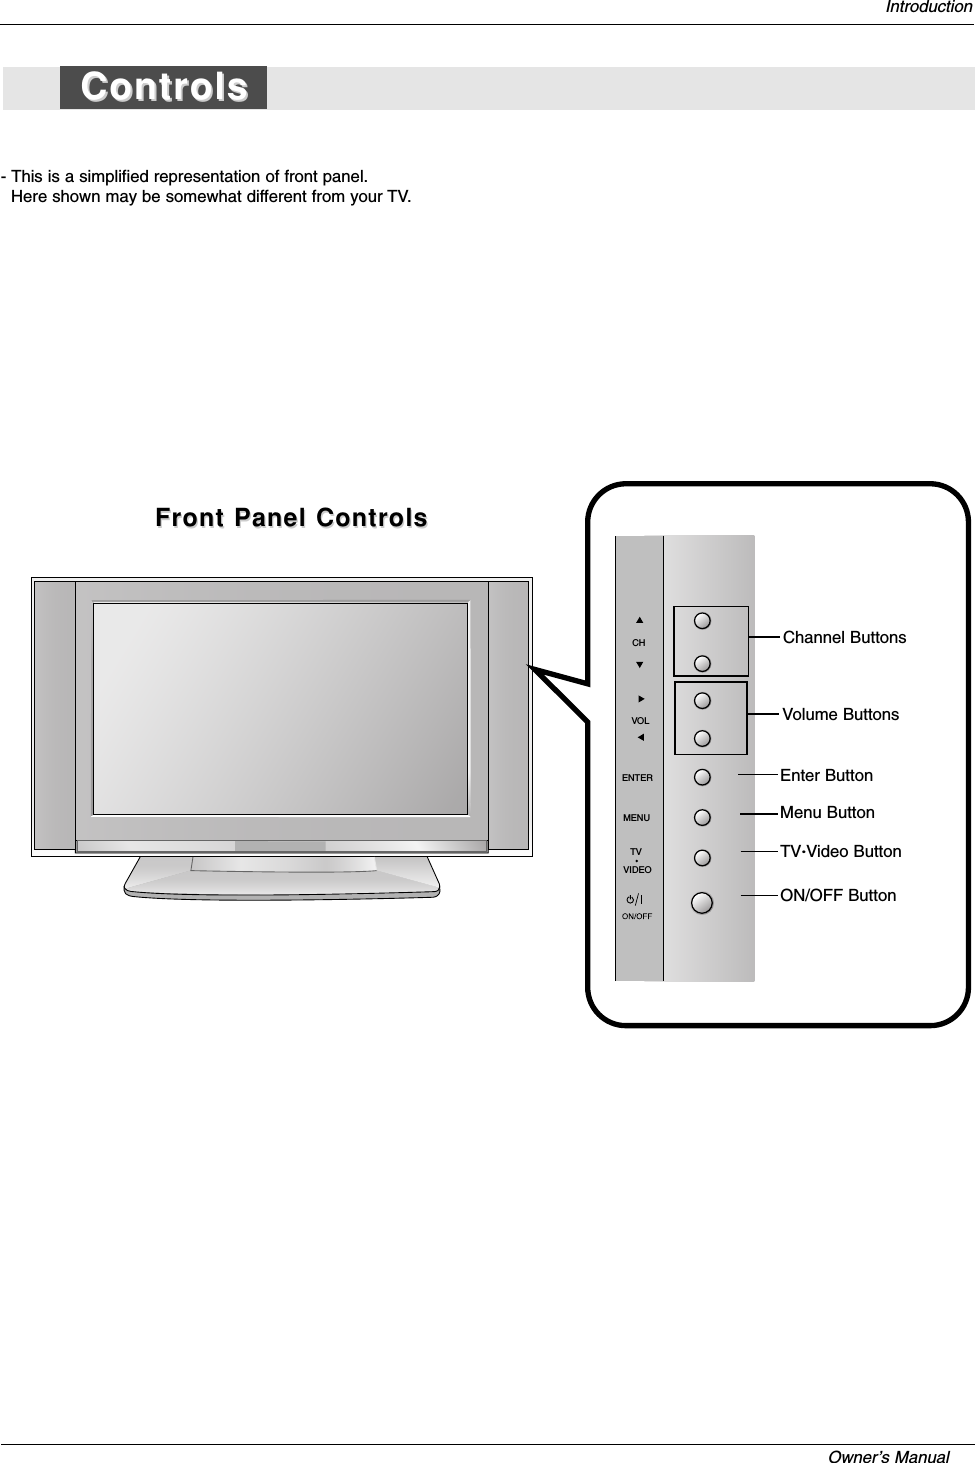 Owner’s Manual   Introduction- This is a simplified representation of front panel. Here shown may be somewhat different from your TV.ControlsControlsCHVOLENTERMENUTVVIDEOChannel ButtonsVolume ButtonsEnter ButtonMenu ButtonTV·Video ButtonON/OFF ButtonFront Panel ControlsFront Panel Controls